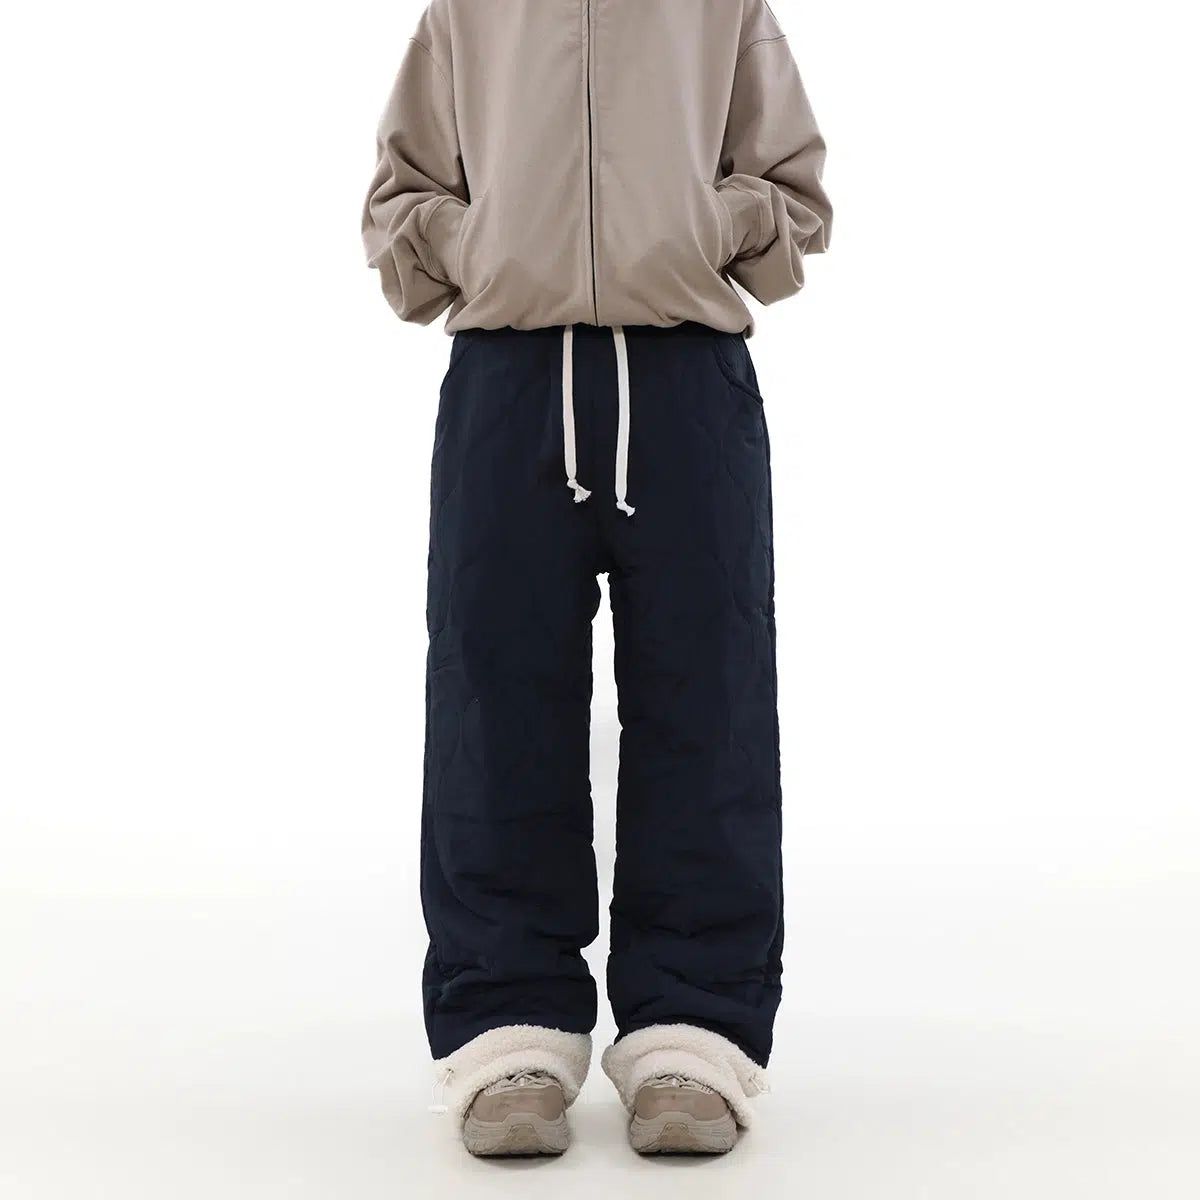 Fur Spliced Cuff Puffer Pants Korean Street Fashion Pants By Mr Nearly Shop Online at OH Vault